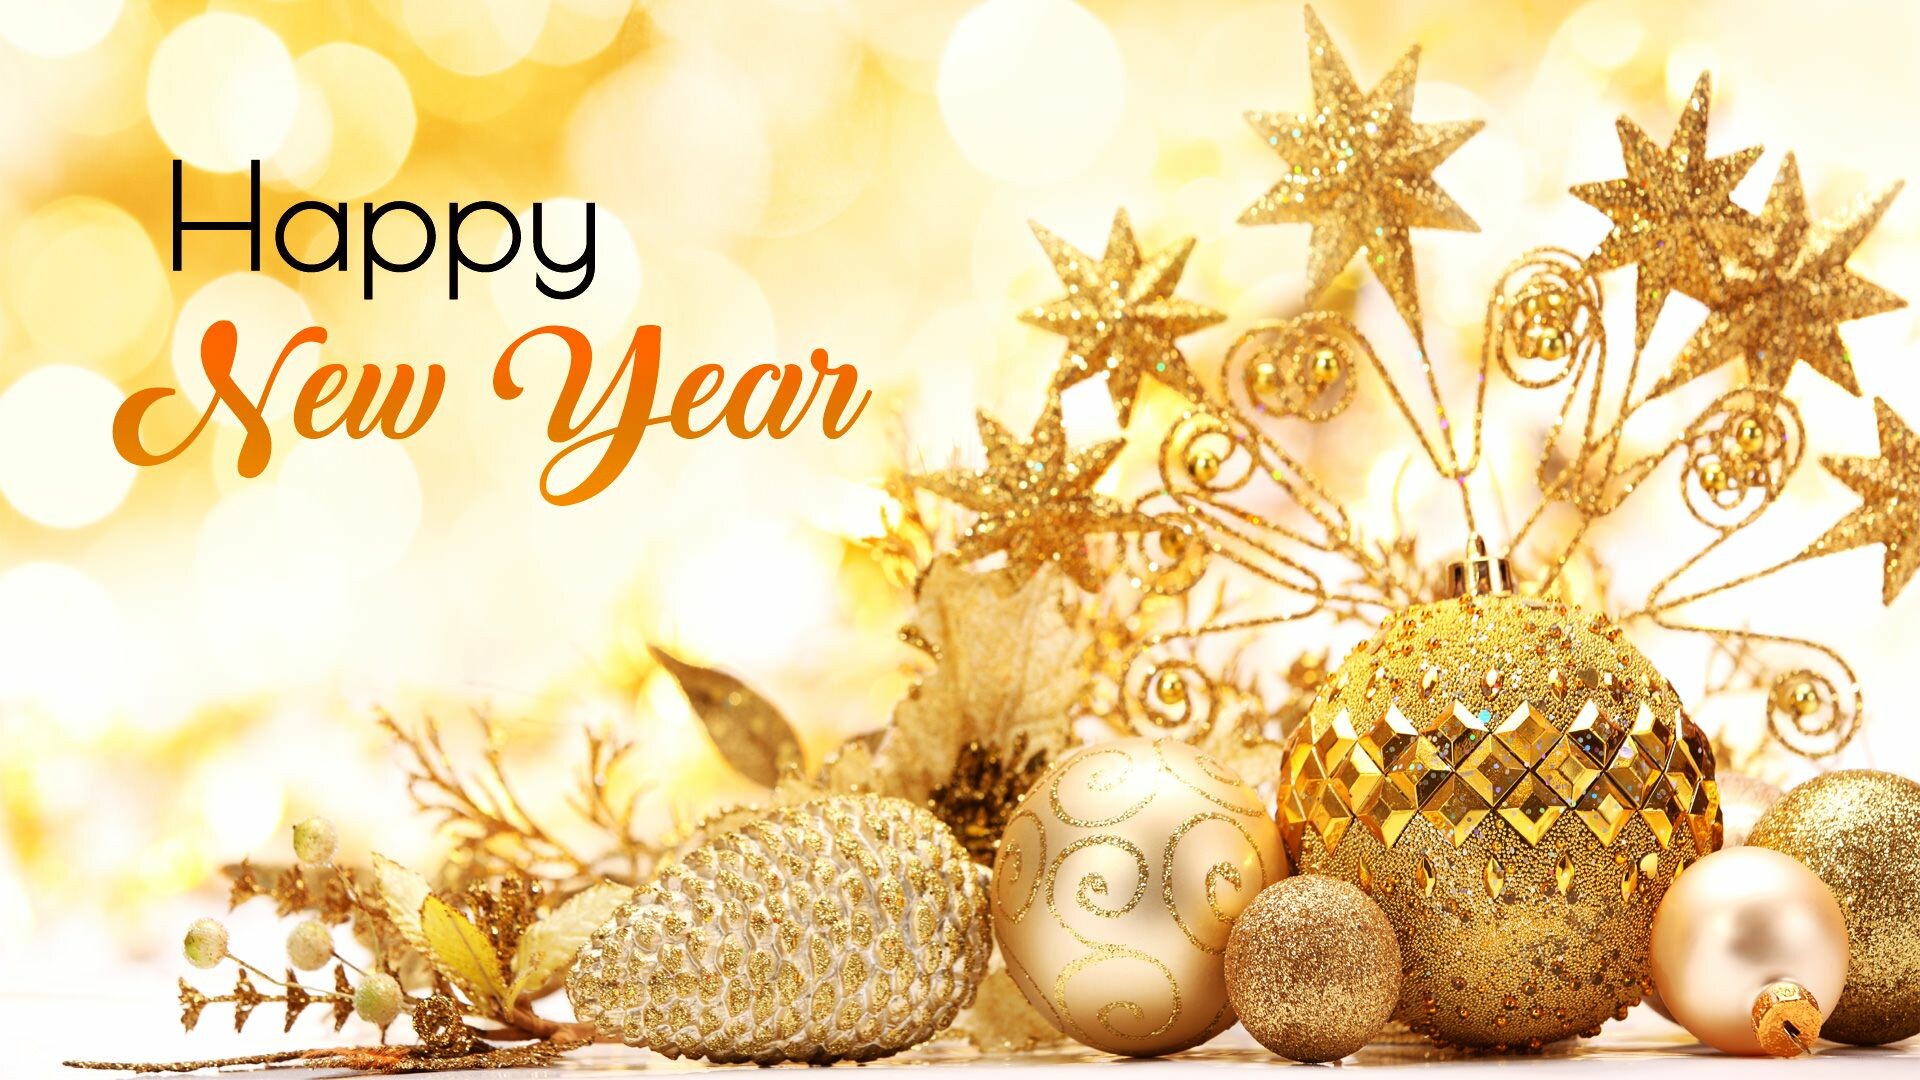 New Year: Festive activity, observed on the first day of the Gregorian calendar, Greeting. 1920x1080 Full HD Wallpaper.